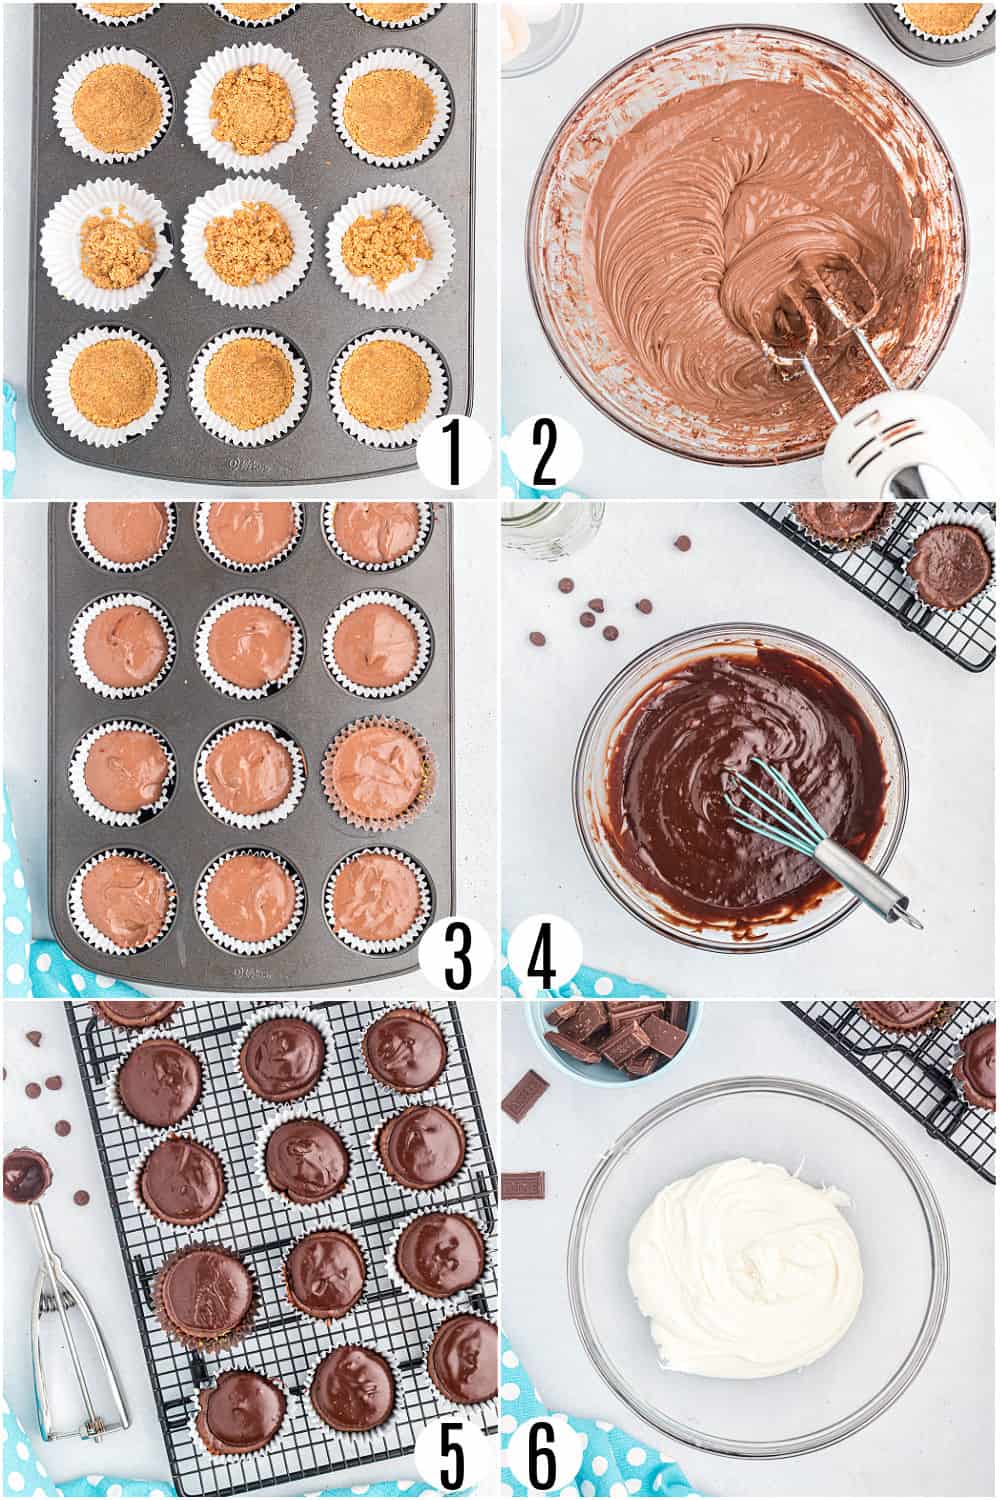 Step by step photos showing how to make smores cheesecakes in muffin tins.